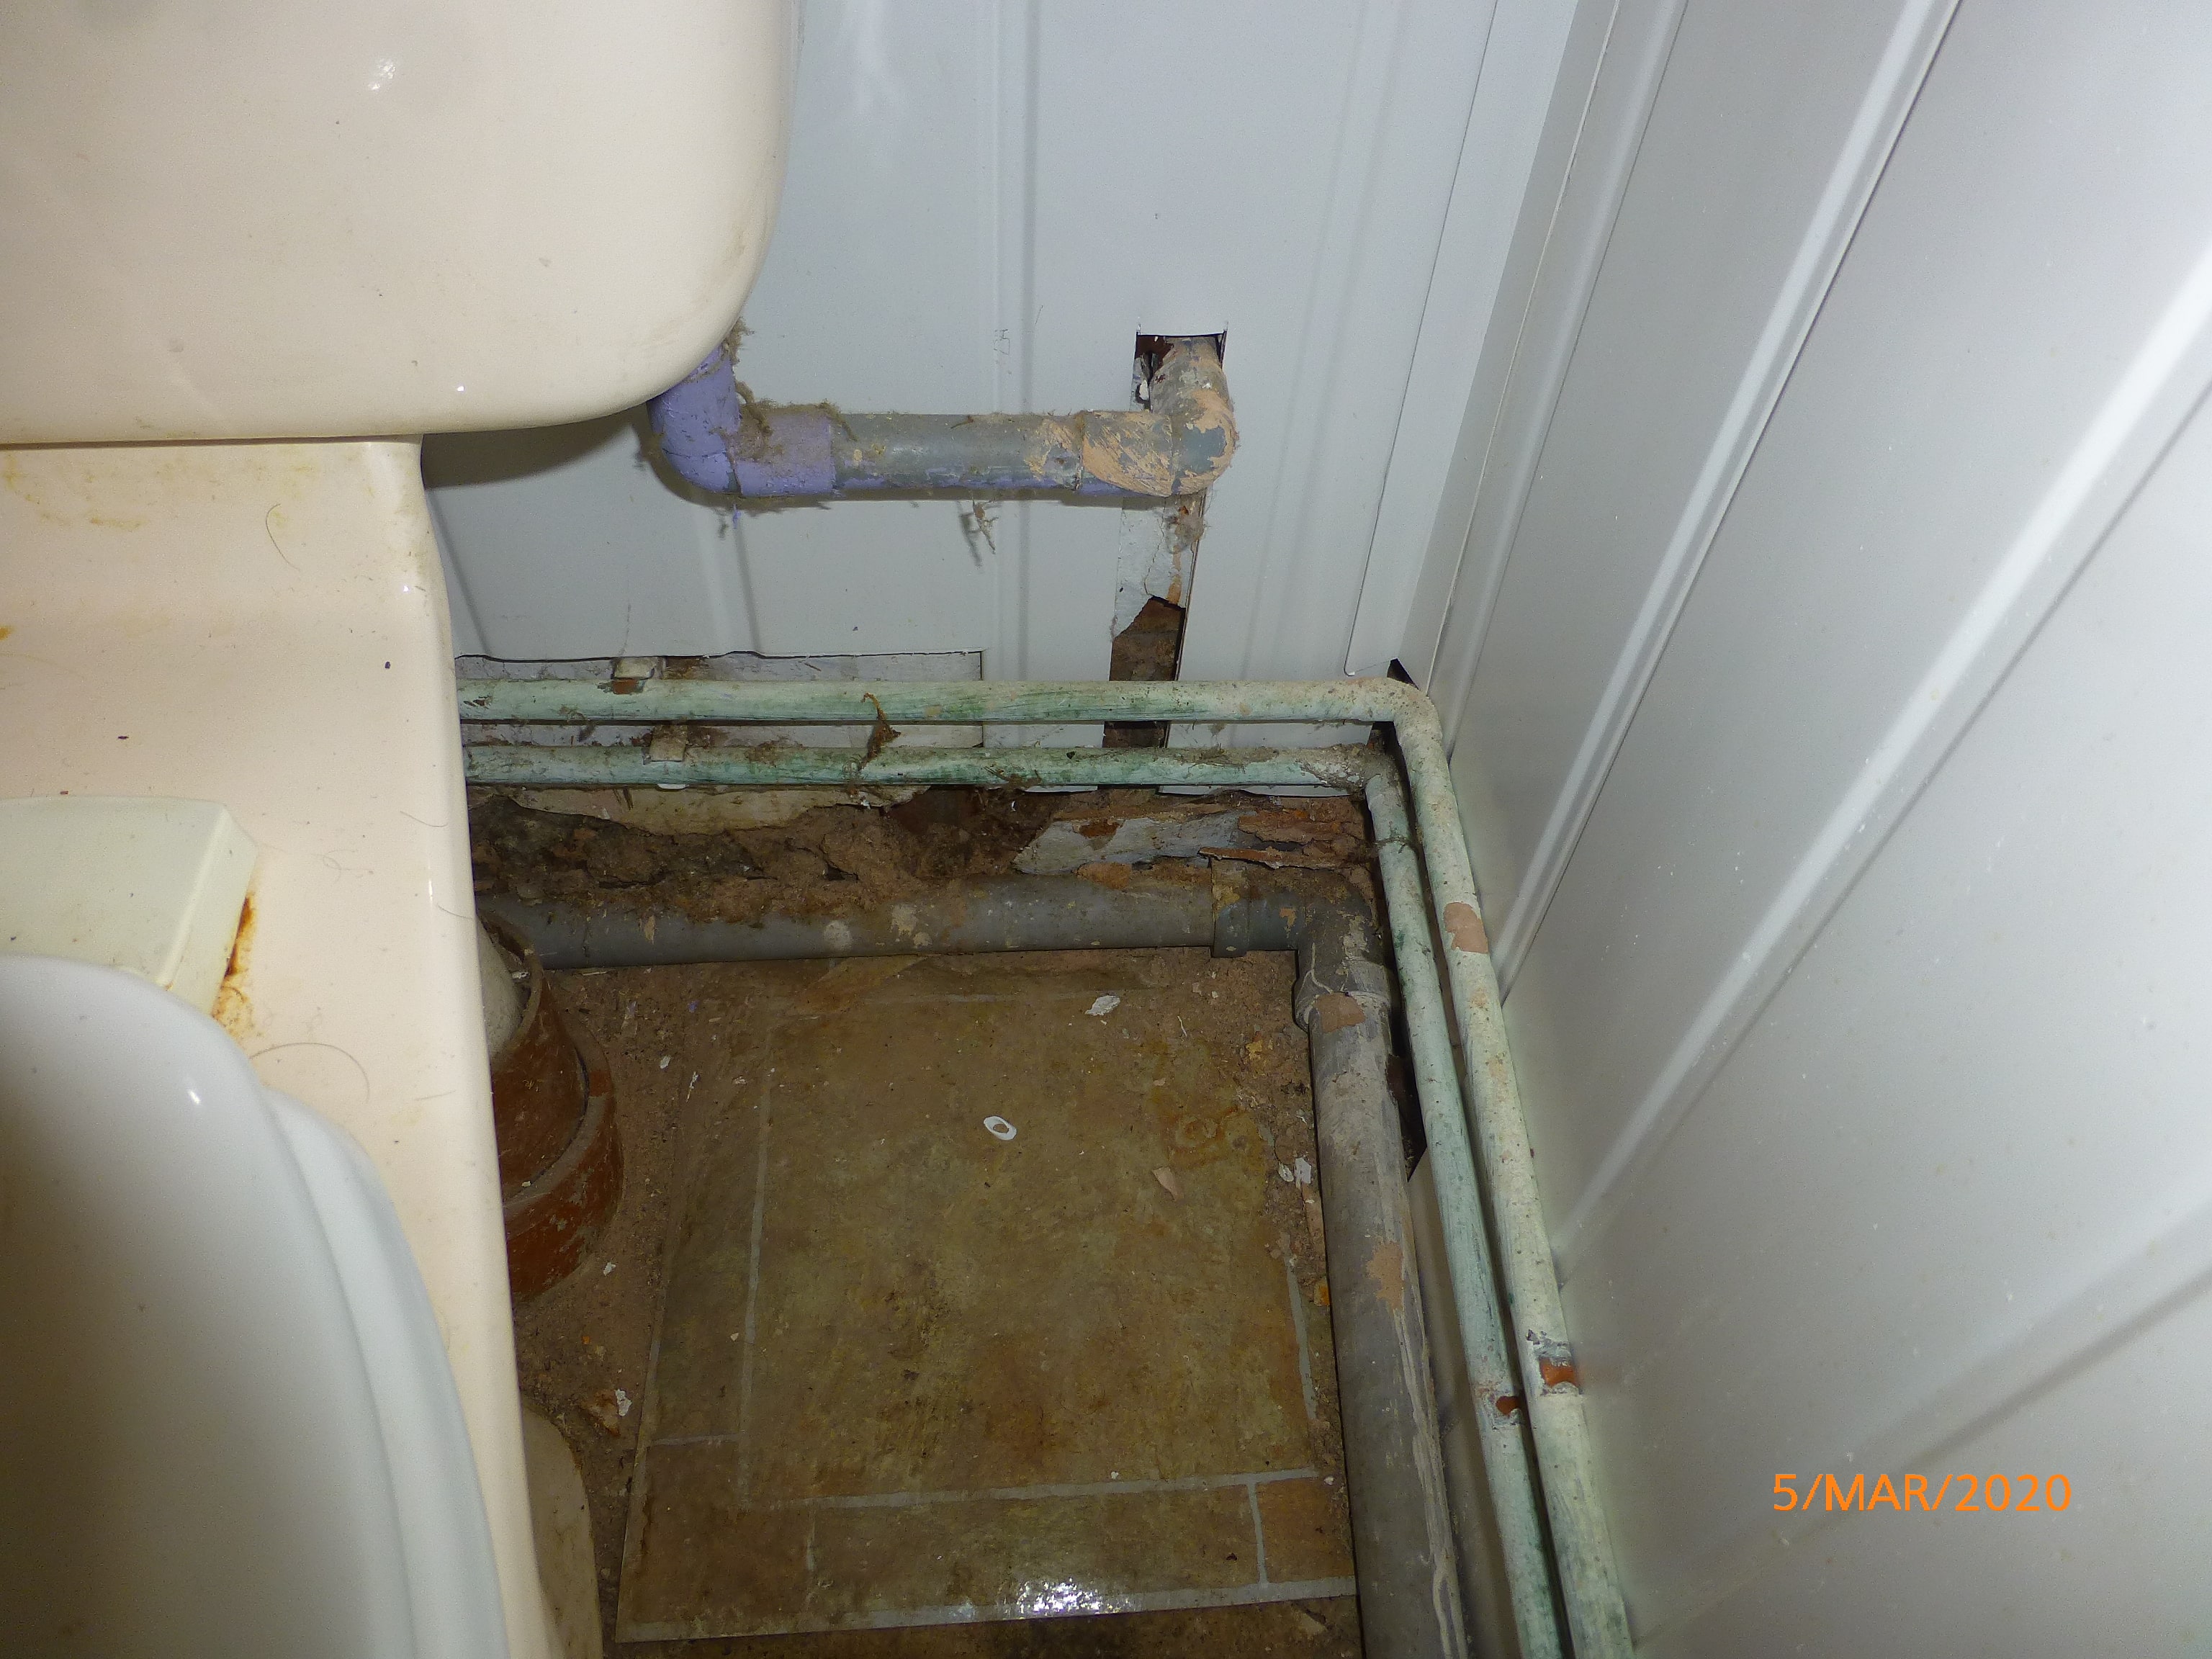 Some of the shoddy work done in the bathroom